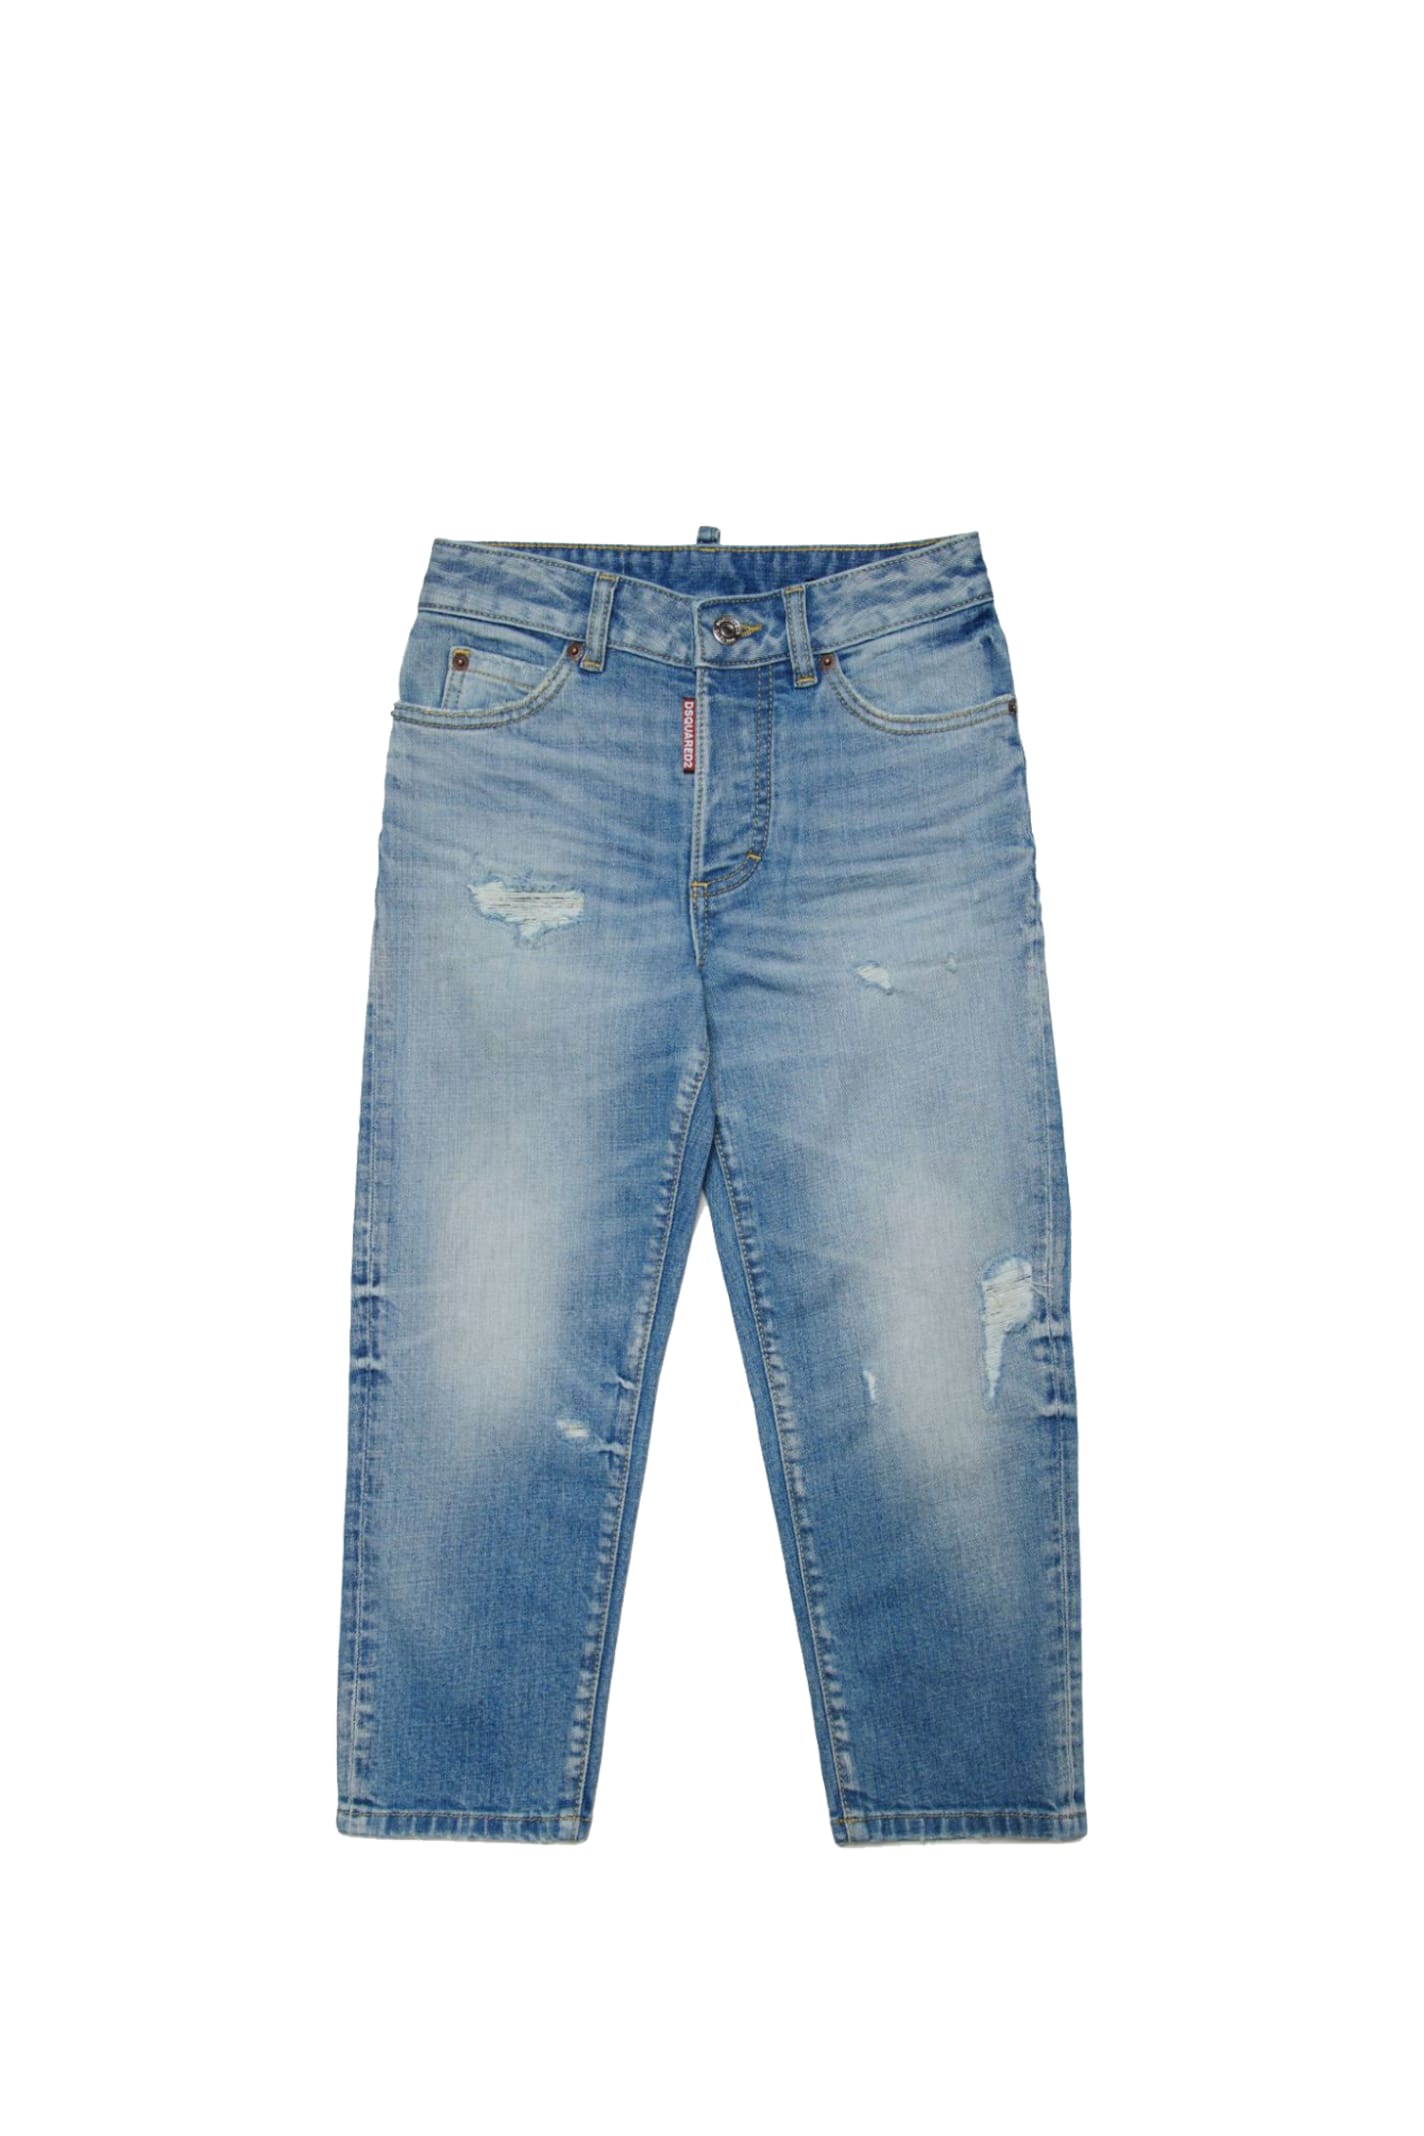 Dsquared2 Straight Jeans With Woven Effect